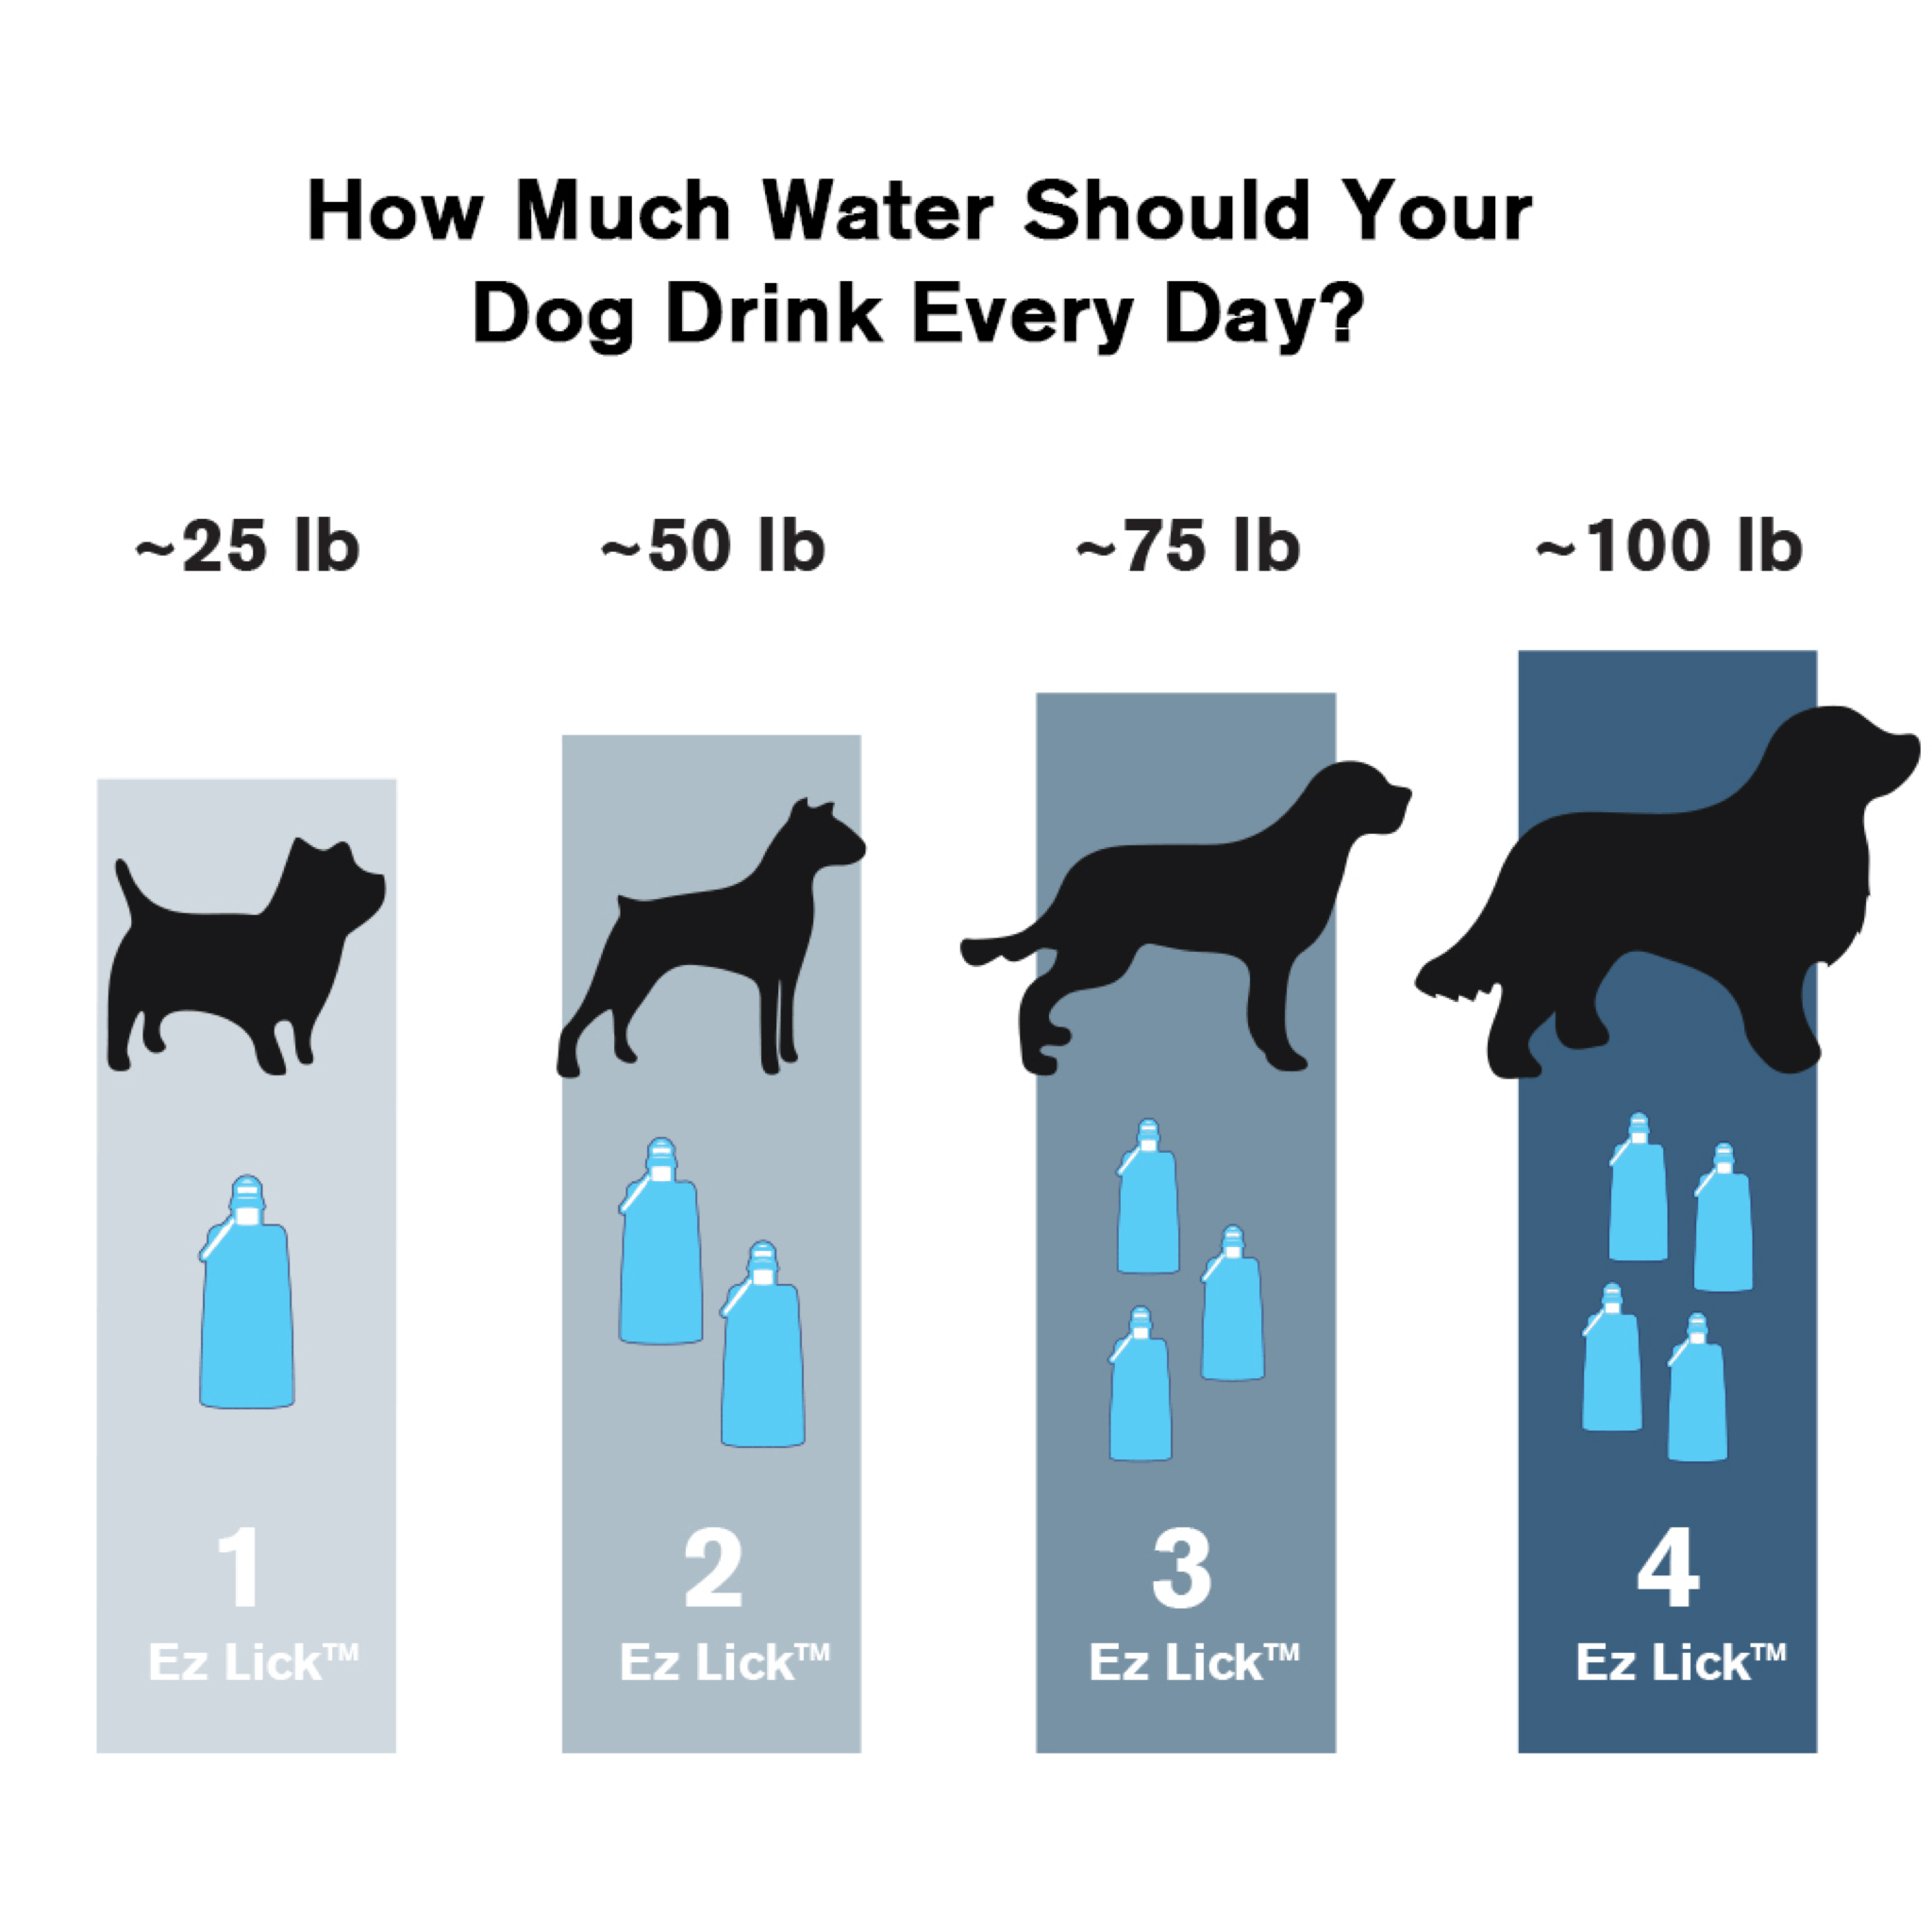 Dog water drinking cycle